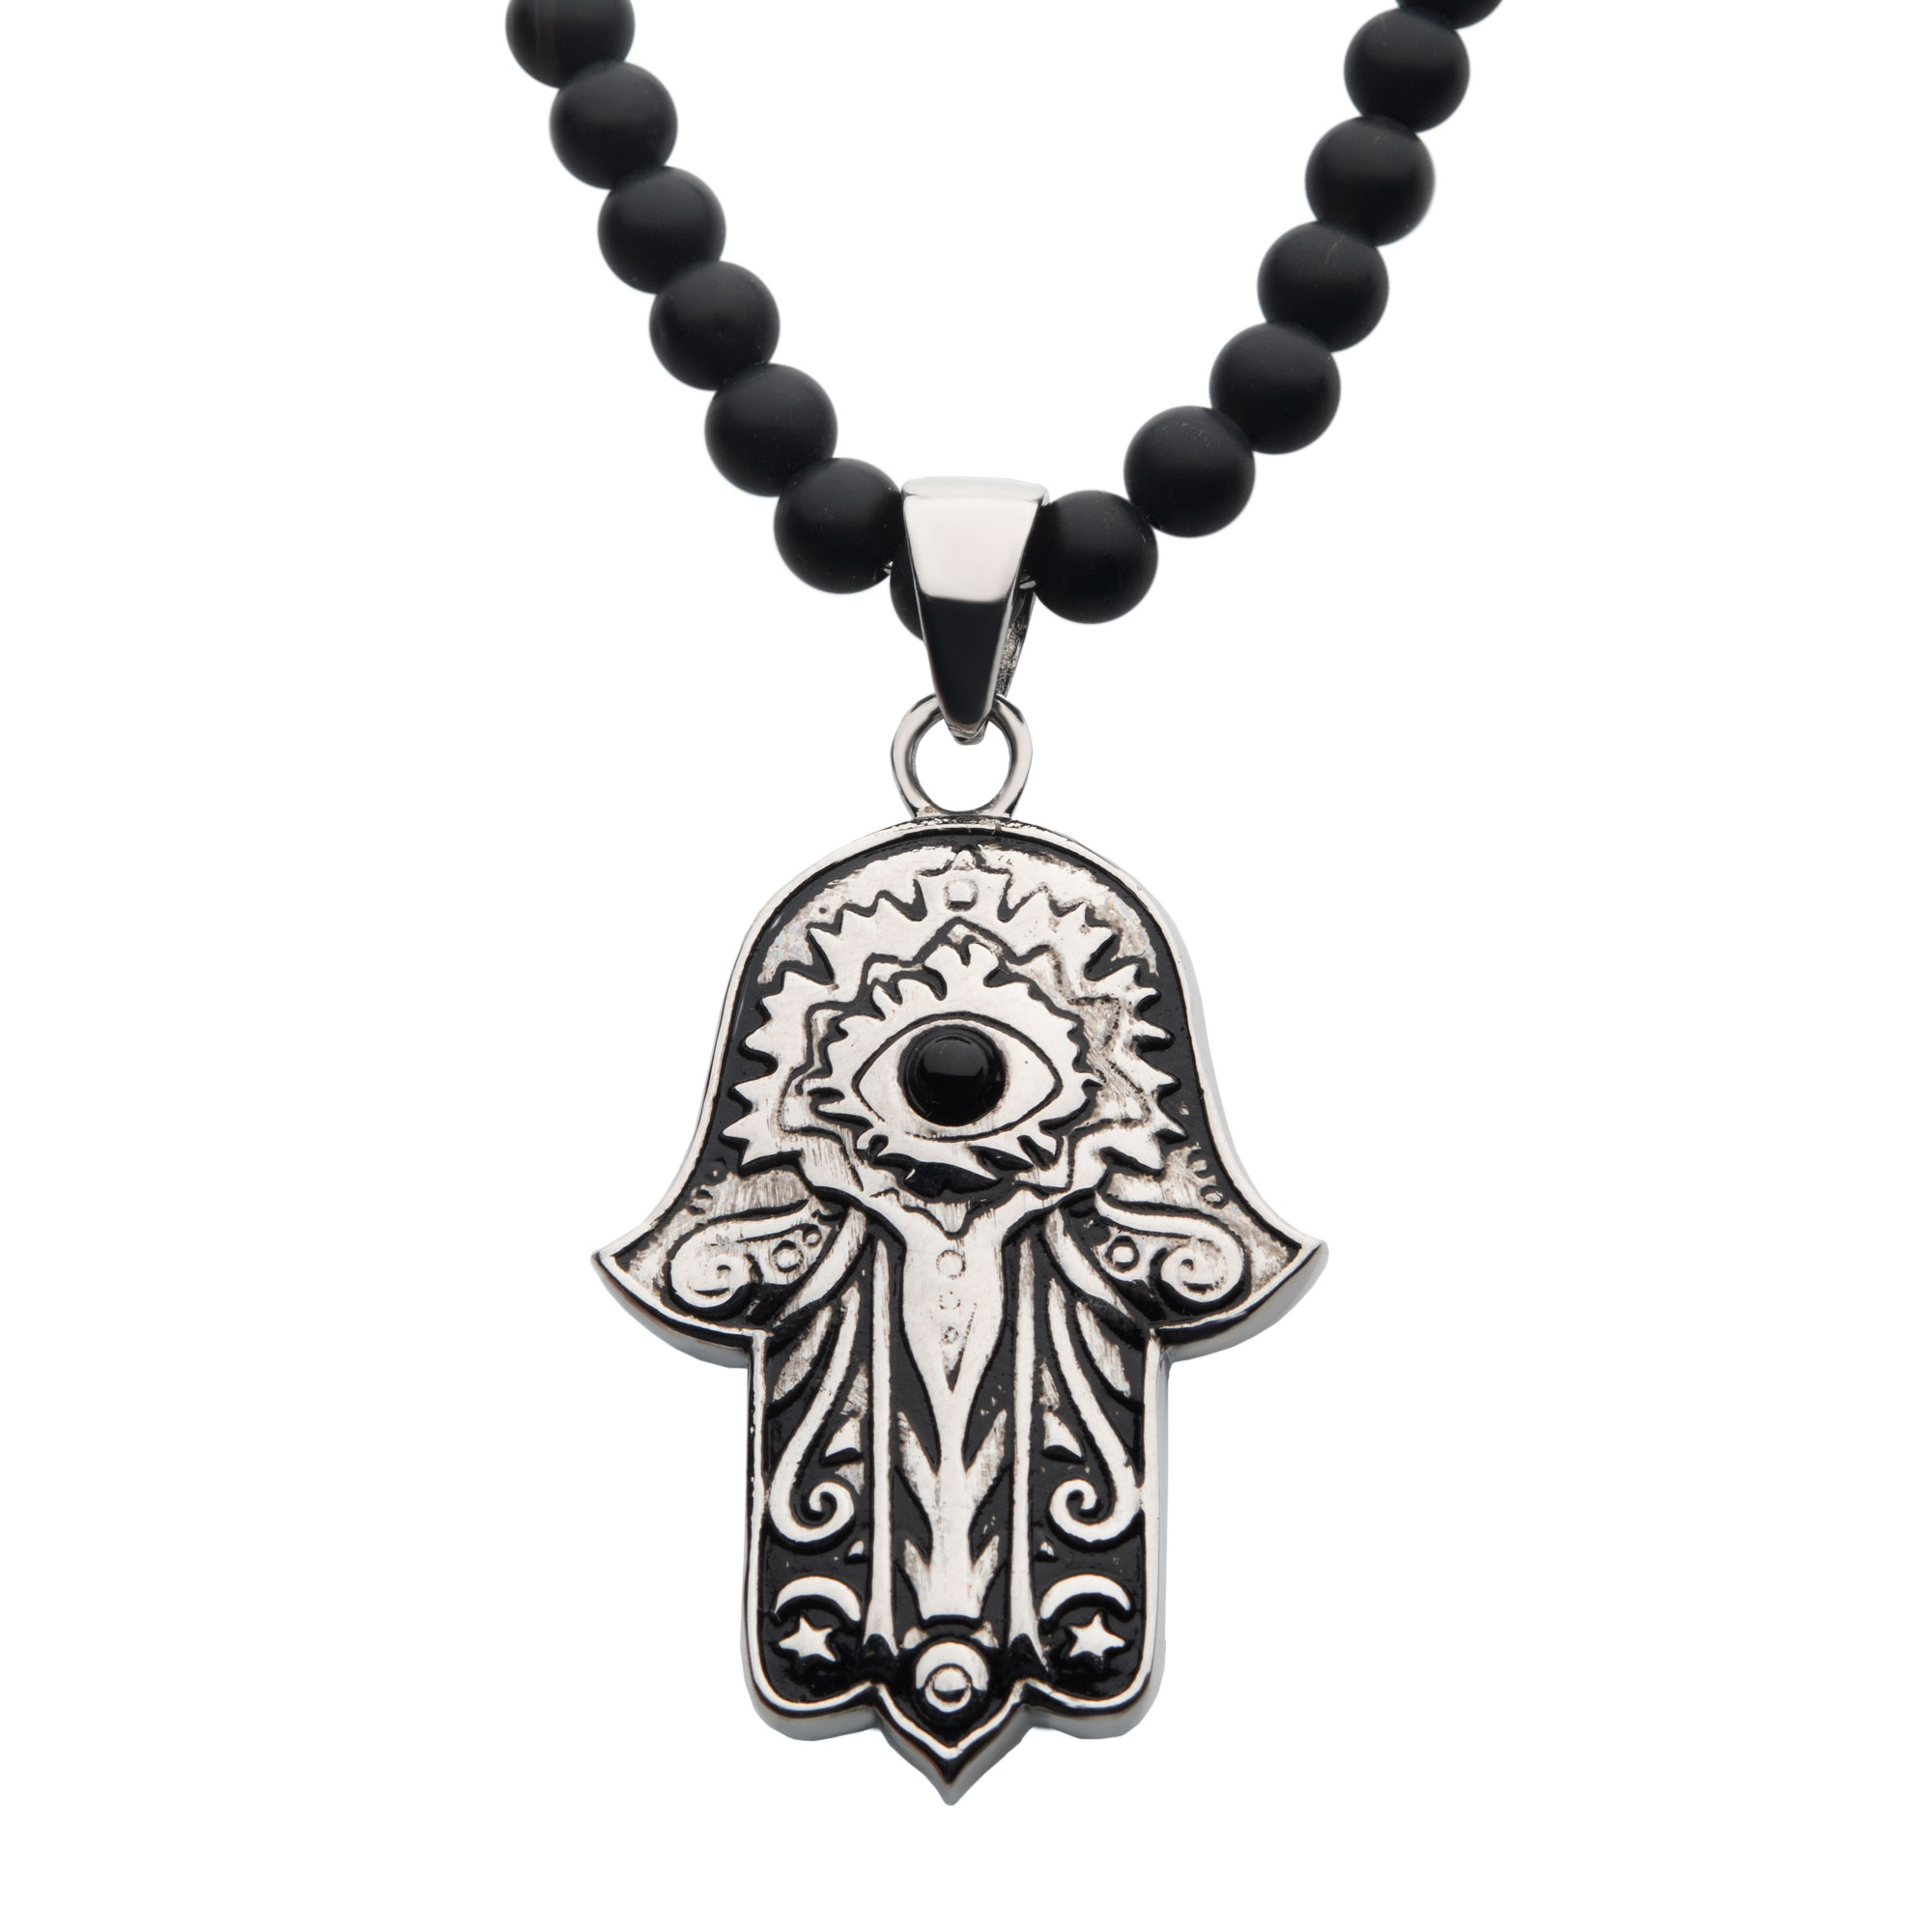 Stainless Steel with Centerpiece Black Agate Stone Hamsa Pendant, with Black Agate Stone Bead Necklace Ritzi Jewelers Brookville, IN